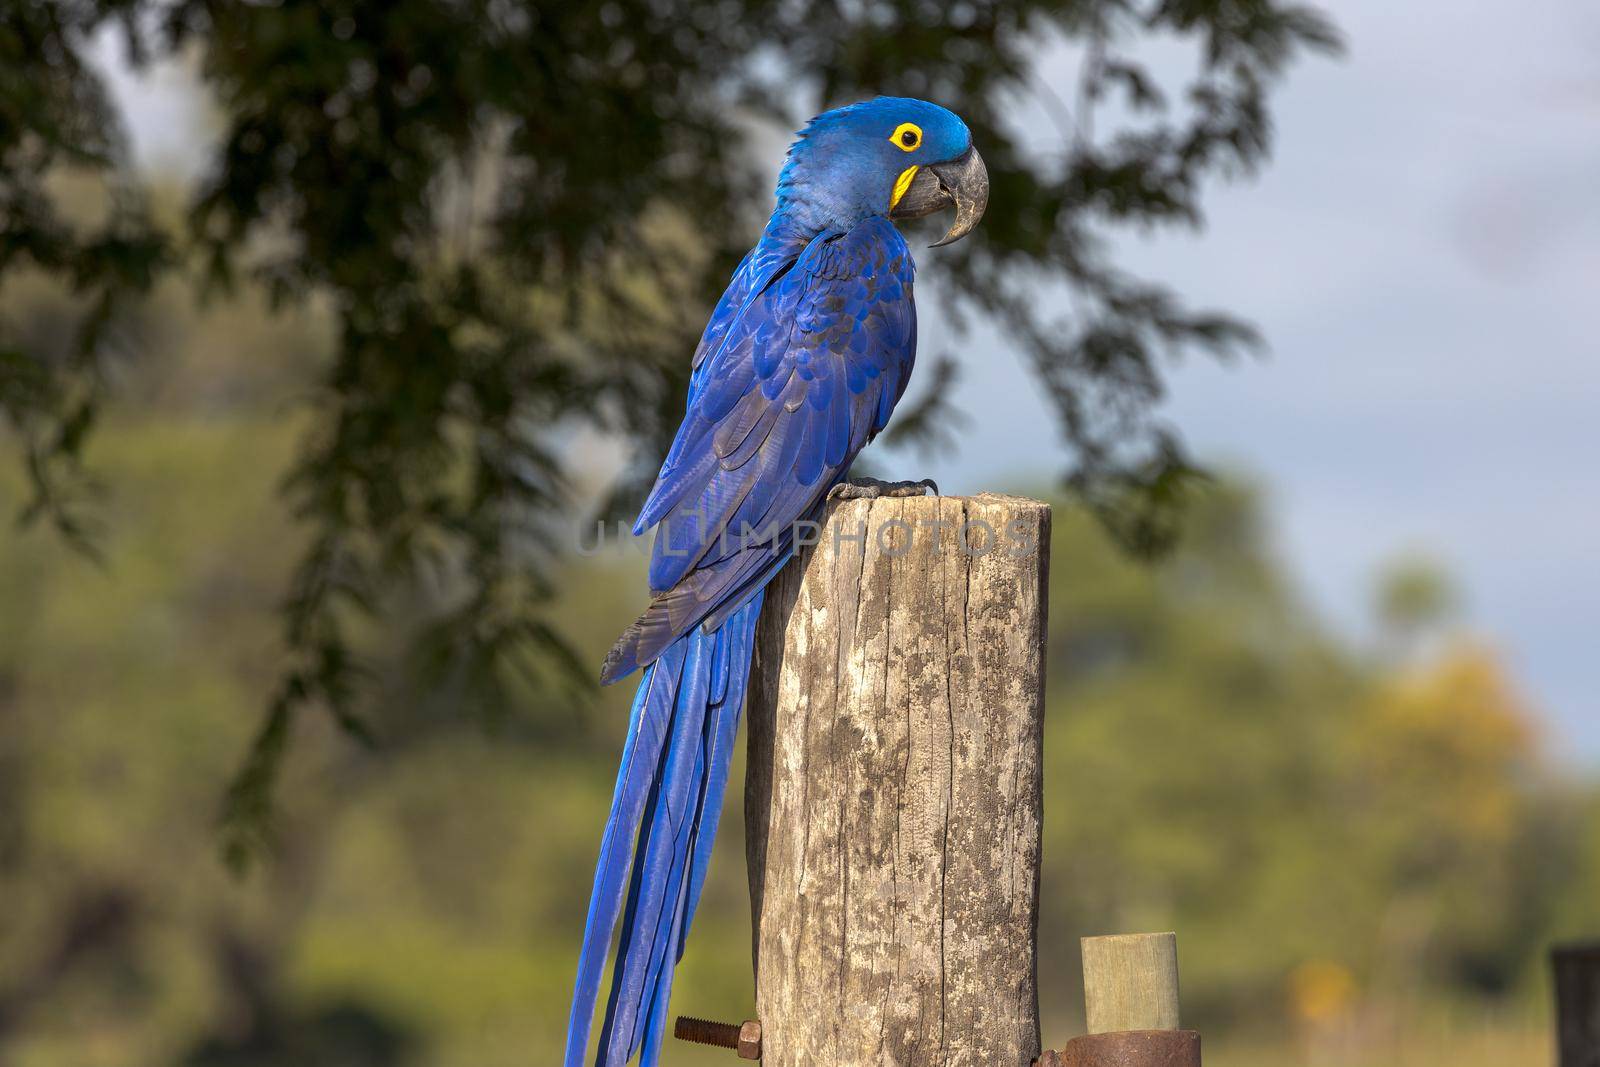 A Hyacinth Macaw, a vulnerable species, on a fencepost in Brazil. by timo043850